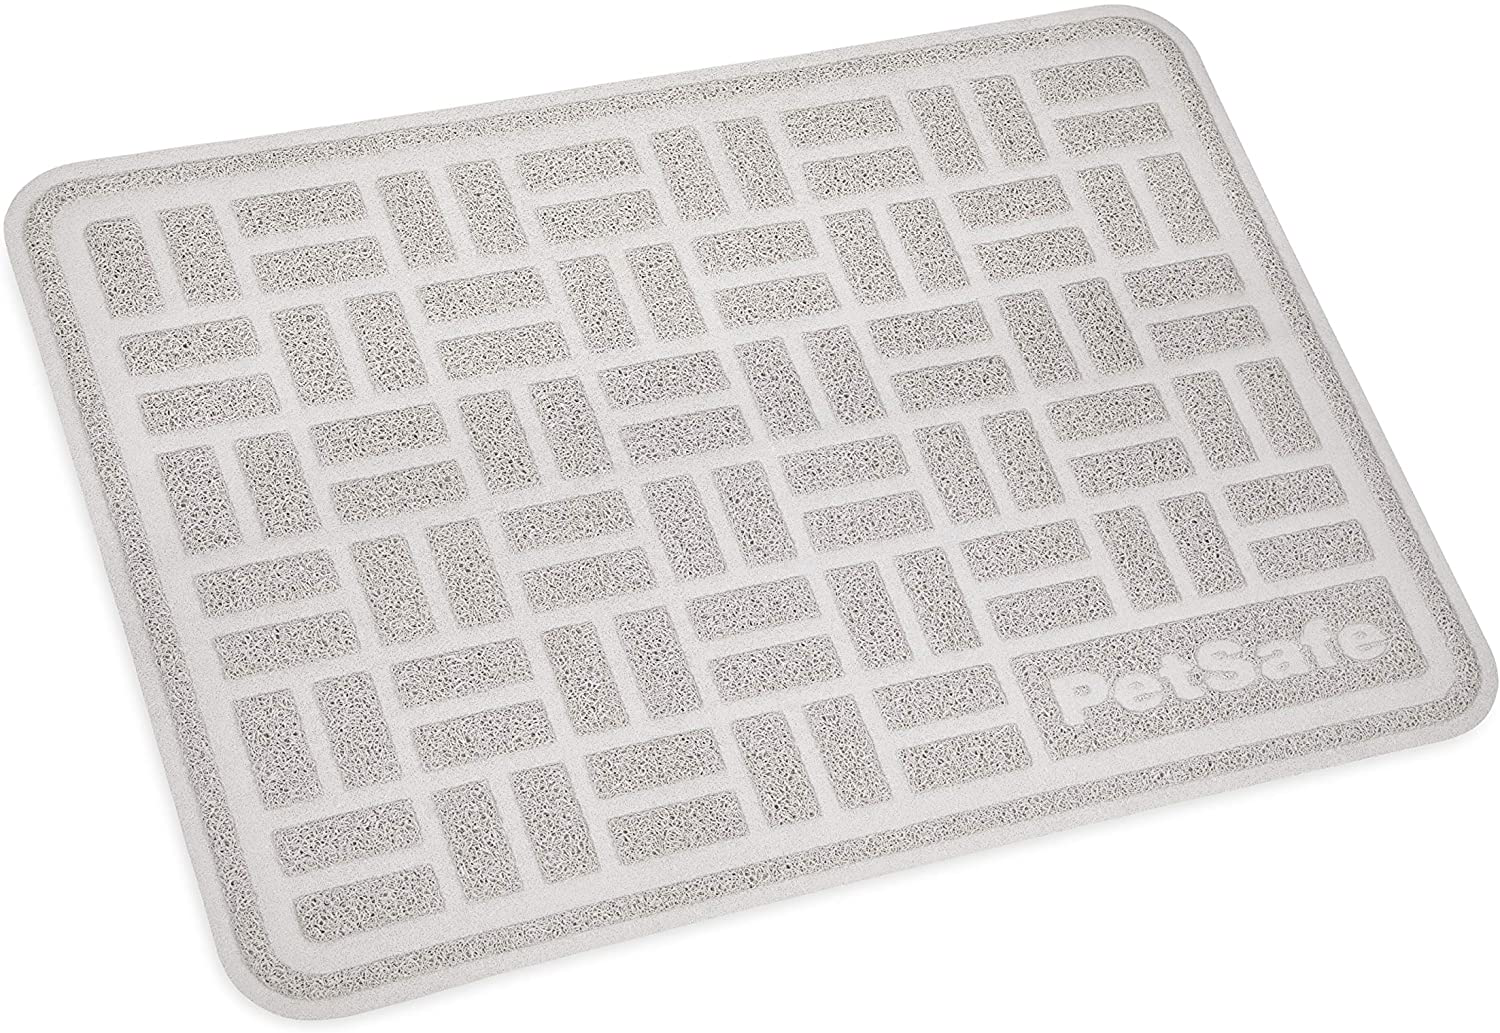 Petsafe Anti-Tracking Litter Mat - Traps Crystal and Clay Clumping Cat Litter - Durable Mesh Material - Easy to Clean Mat - Compatible with All Cat Litter Boxes - Small Size